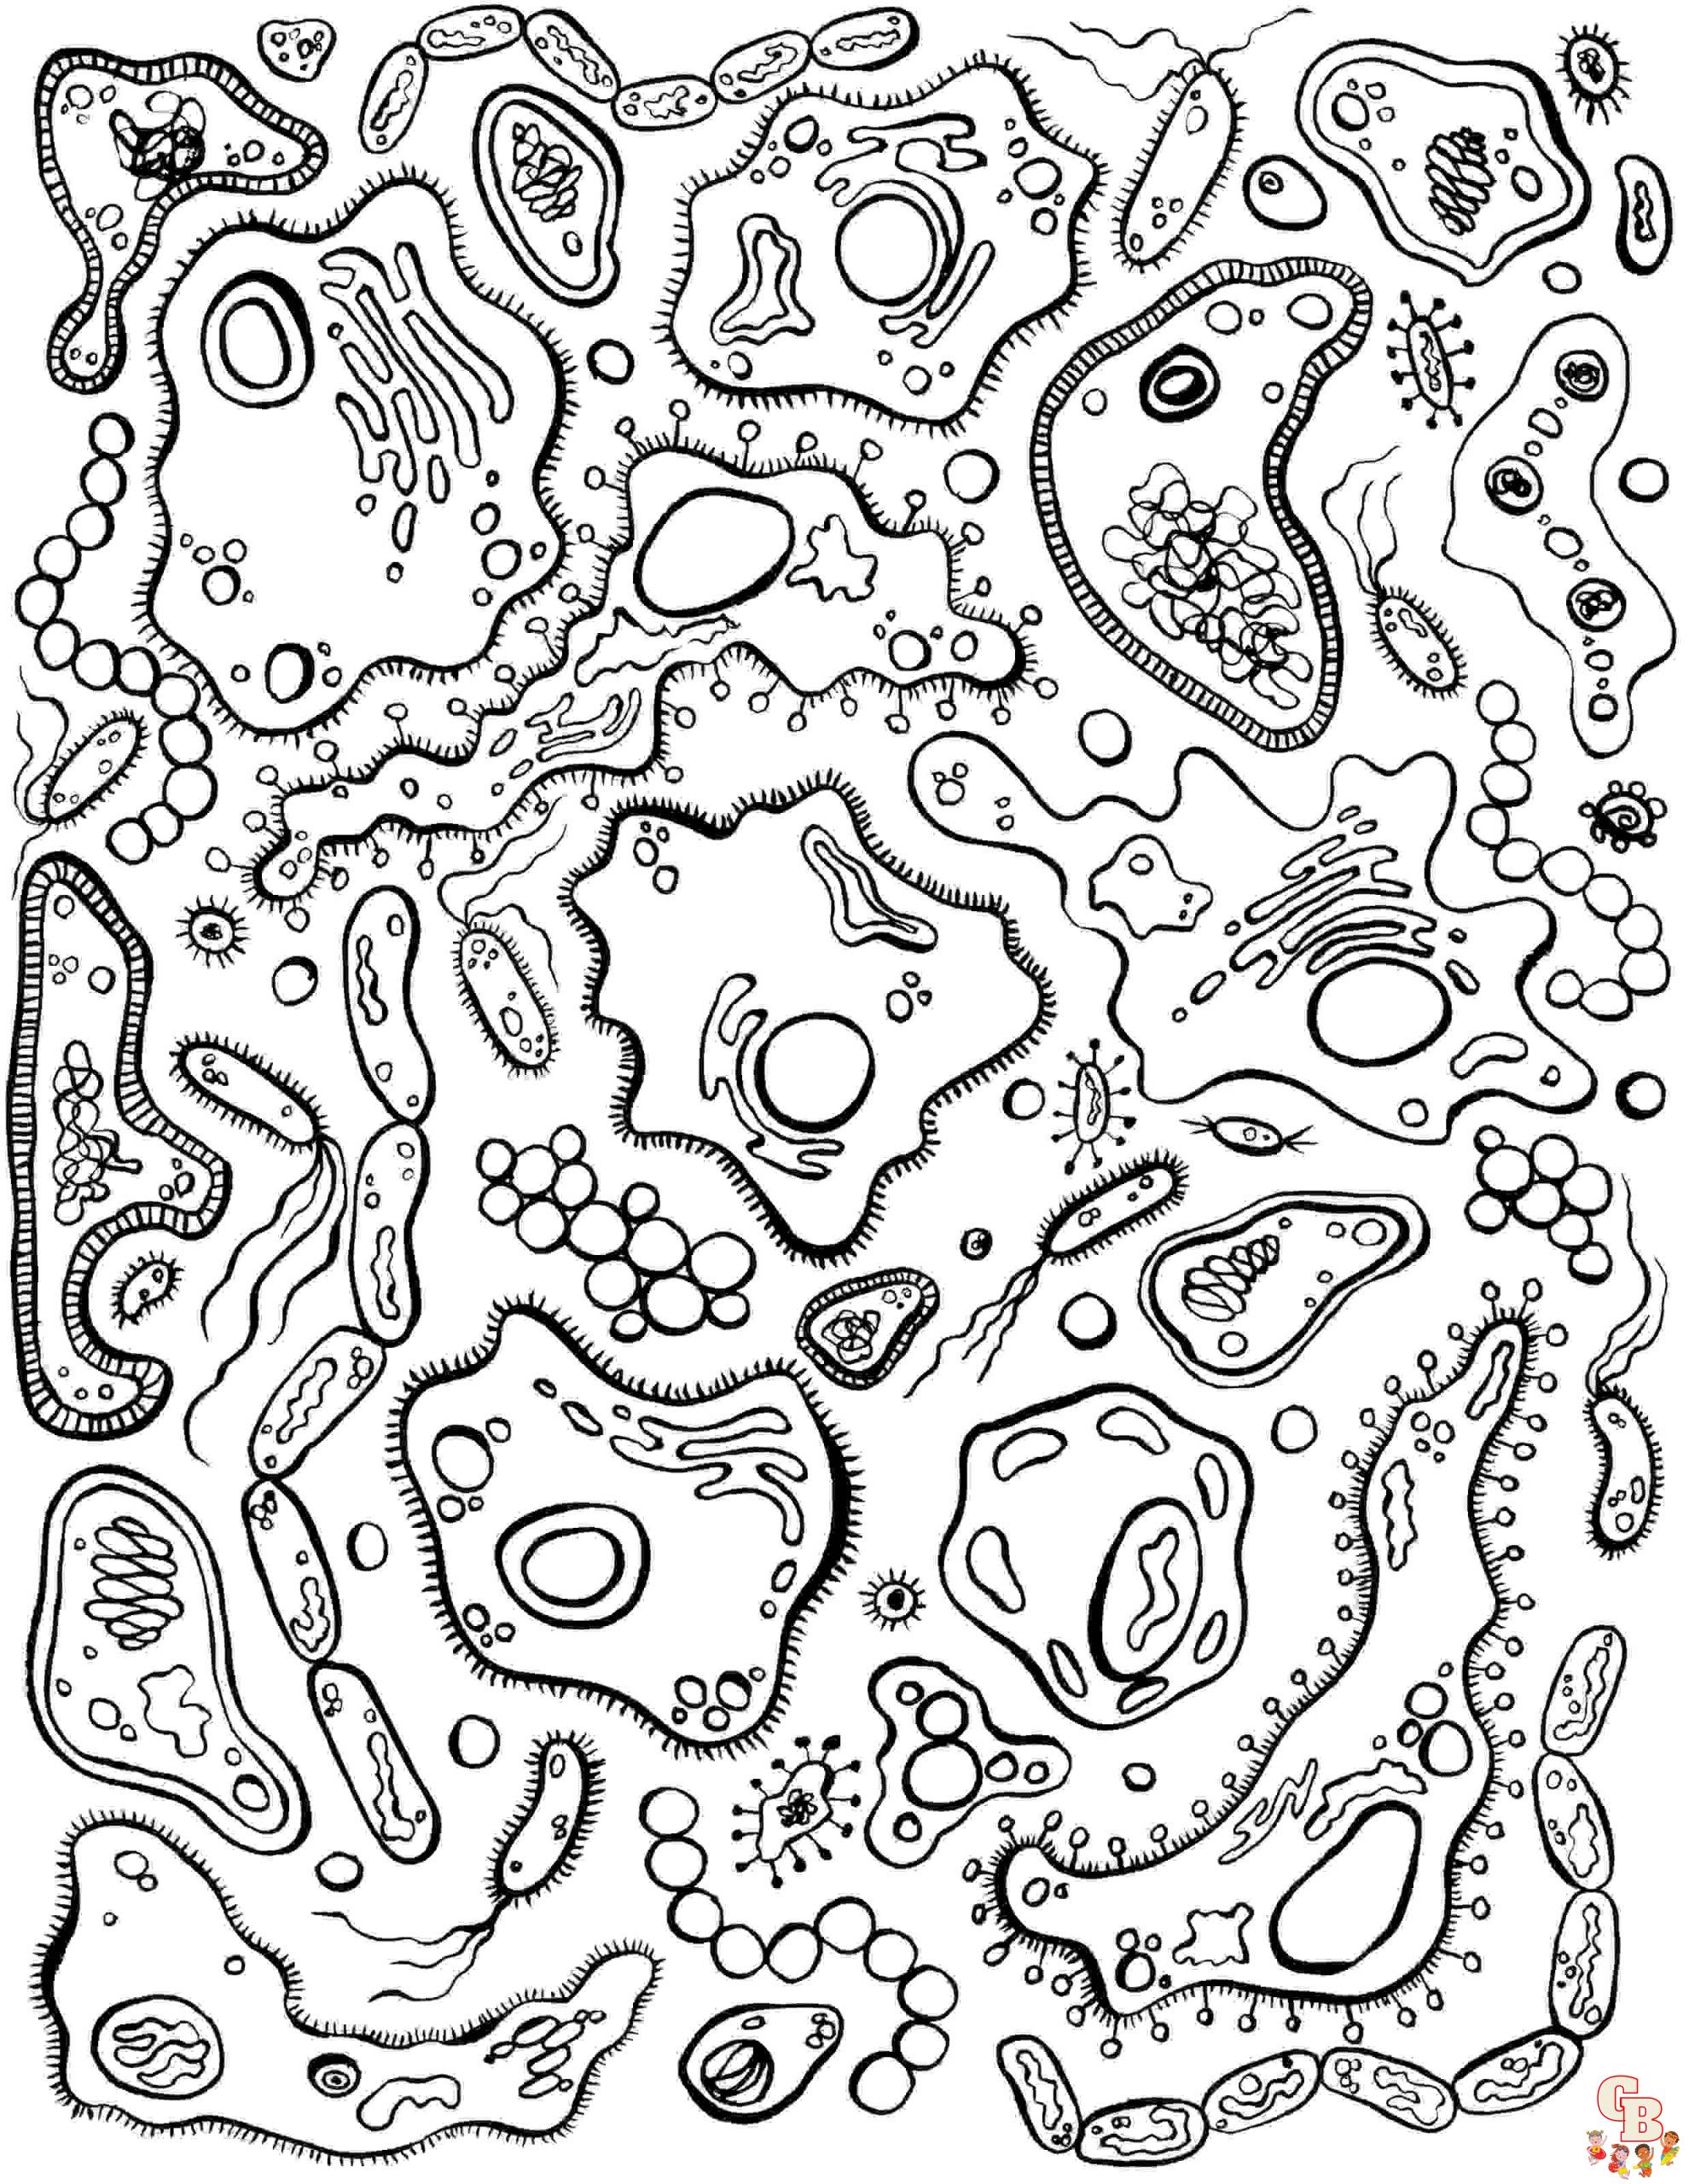 Biology coloring pages printable free